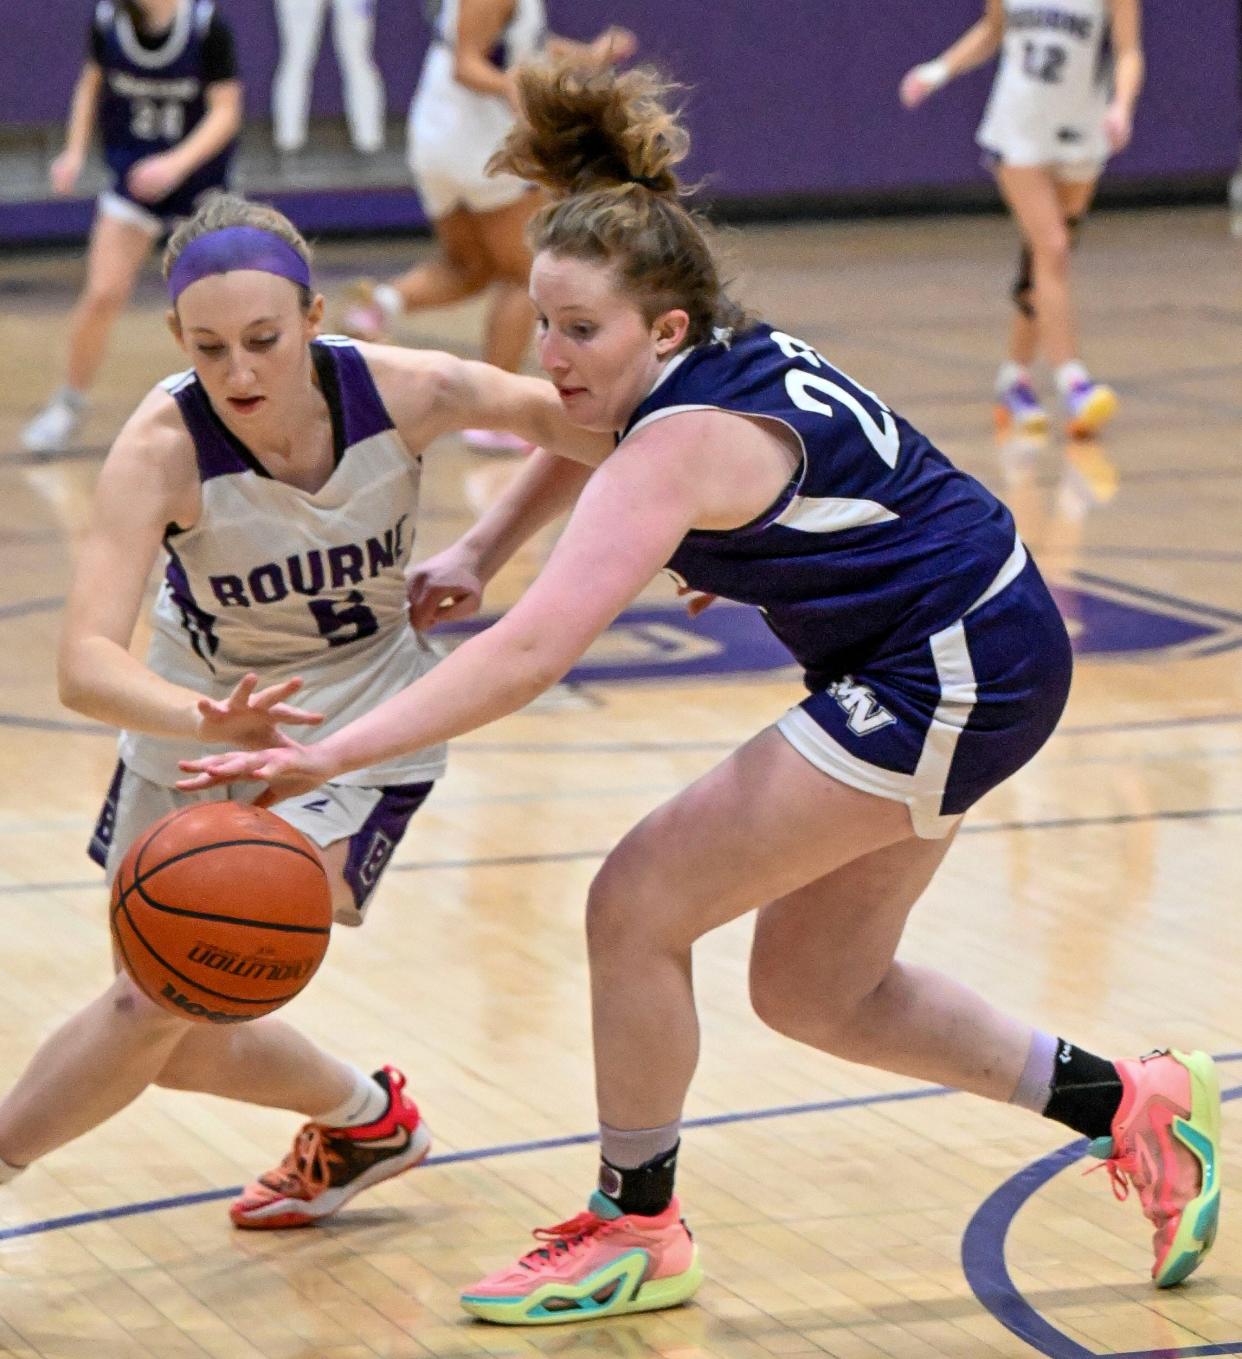 BOURNE 02/21/24 Paige Meda of Bourne steals the ball from Delilah Oliver of Martha's Vineyard girls basketball 
Ron Schloerb/Cape Cod Times